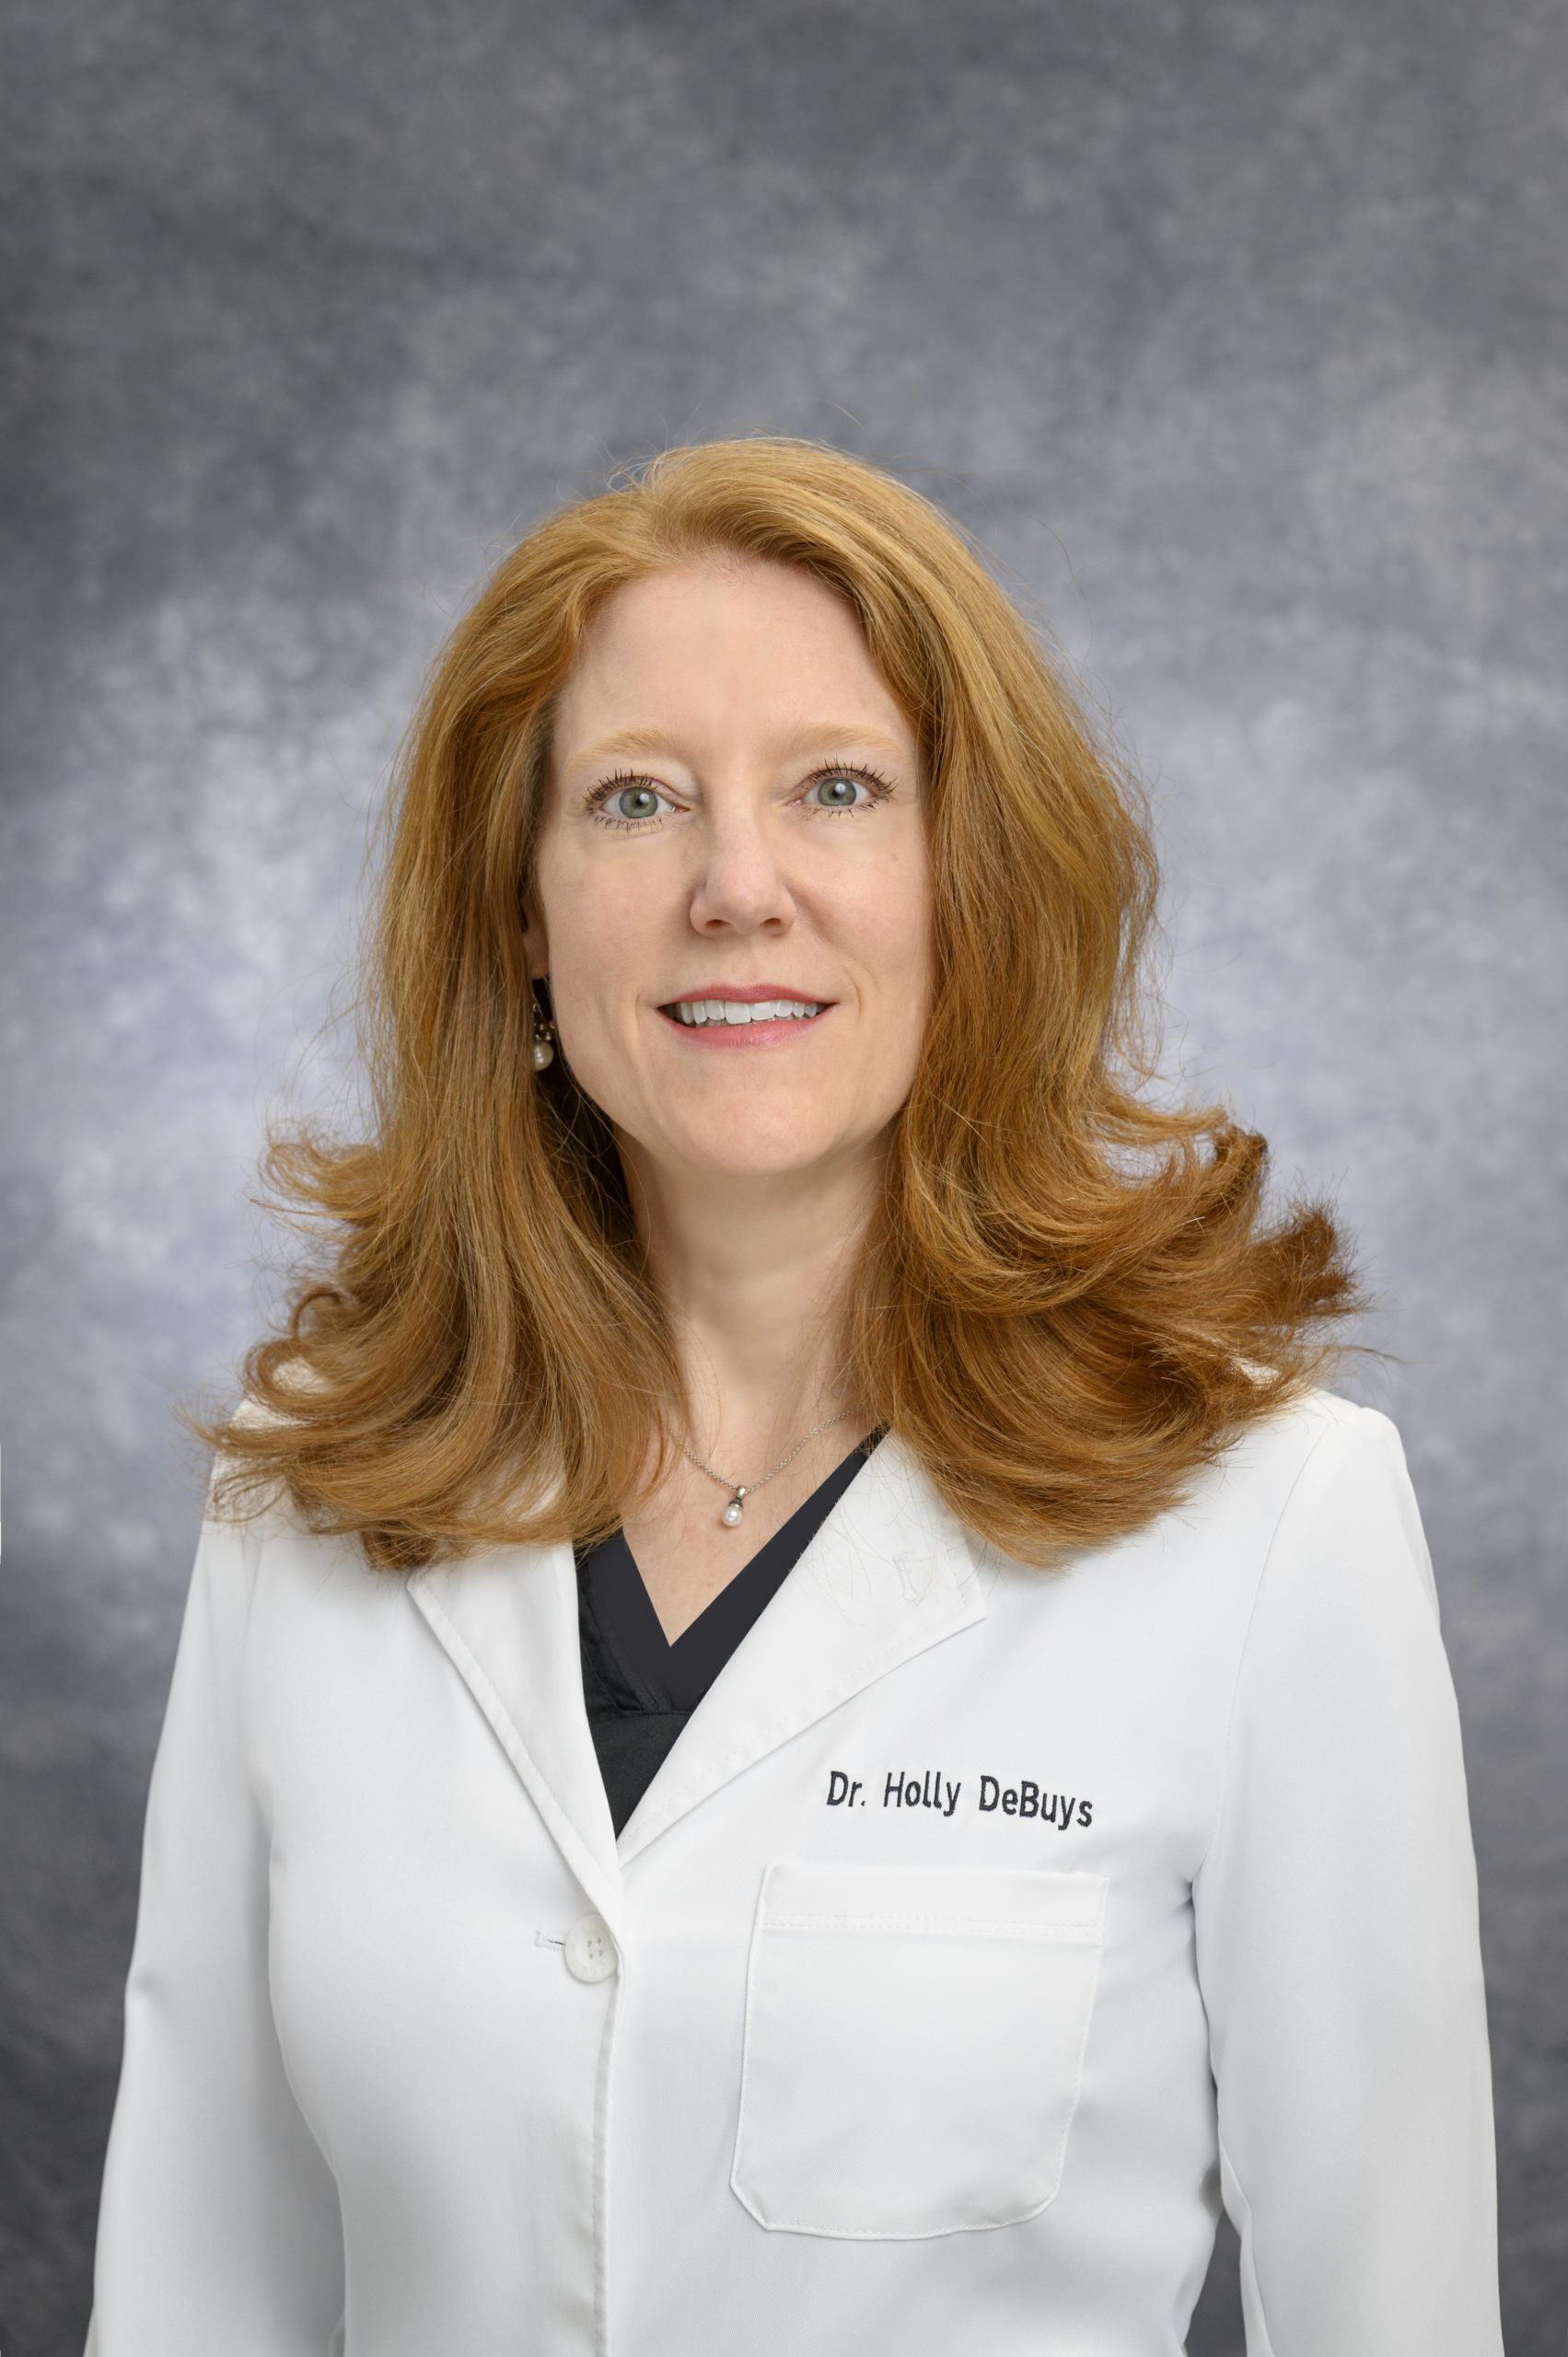 Holly DeBuys, M.D.